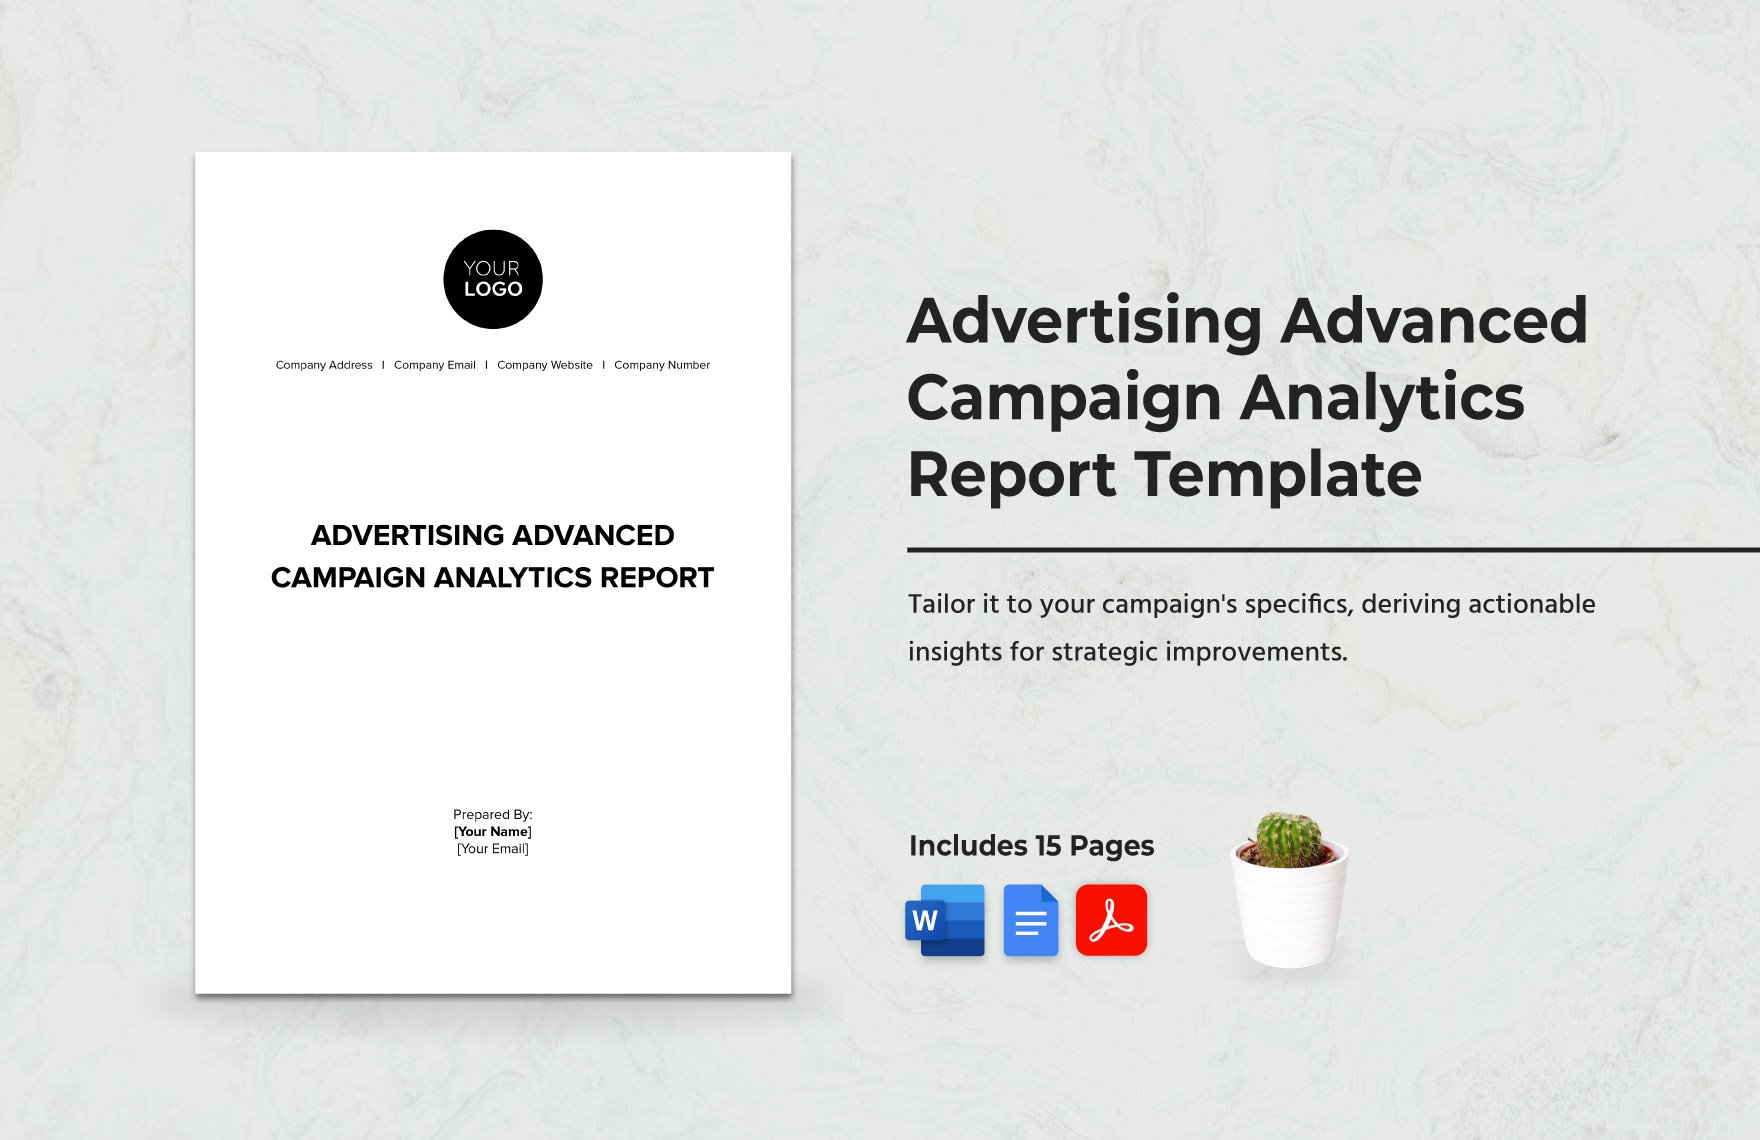 Advertising Advanced Campaign Analytics Report Template